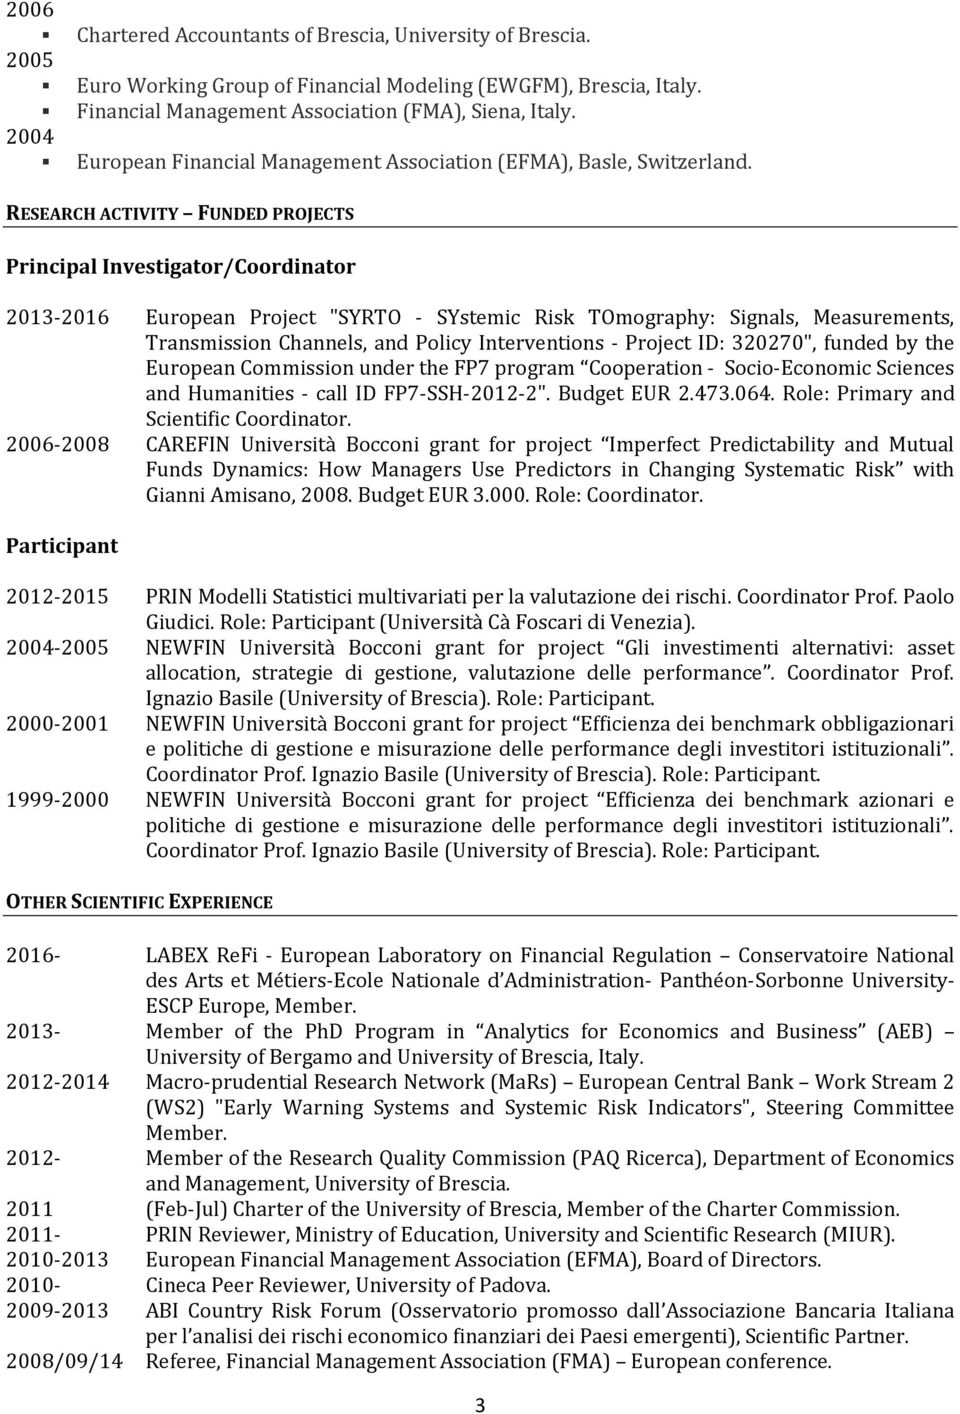 RESEARCH ACTIVITY FUNDED PROJECTS Principal Investigator/Coordinator 2013-2016 European Project "SYRTO - SYstemic Risk TOmography: Signals, Measurements, Transmission Channels, and Policy